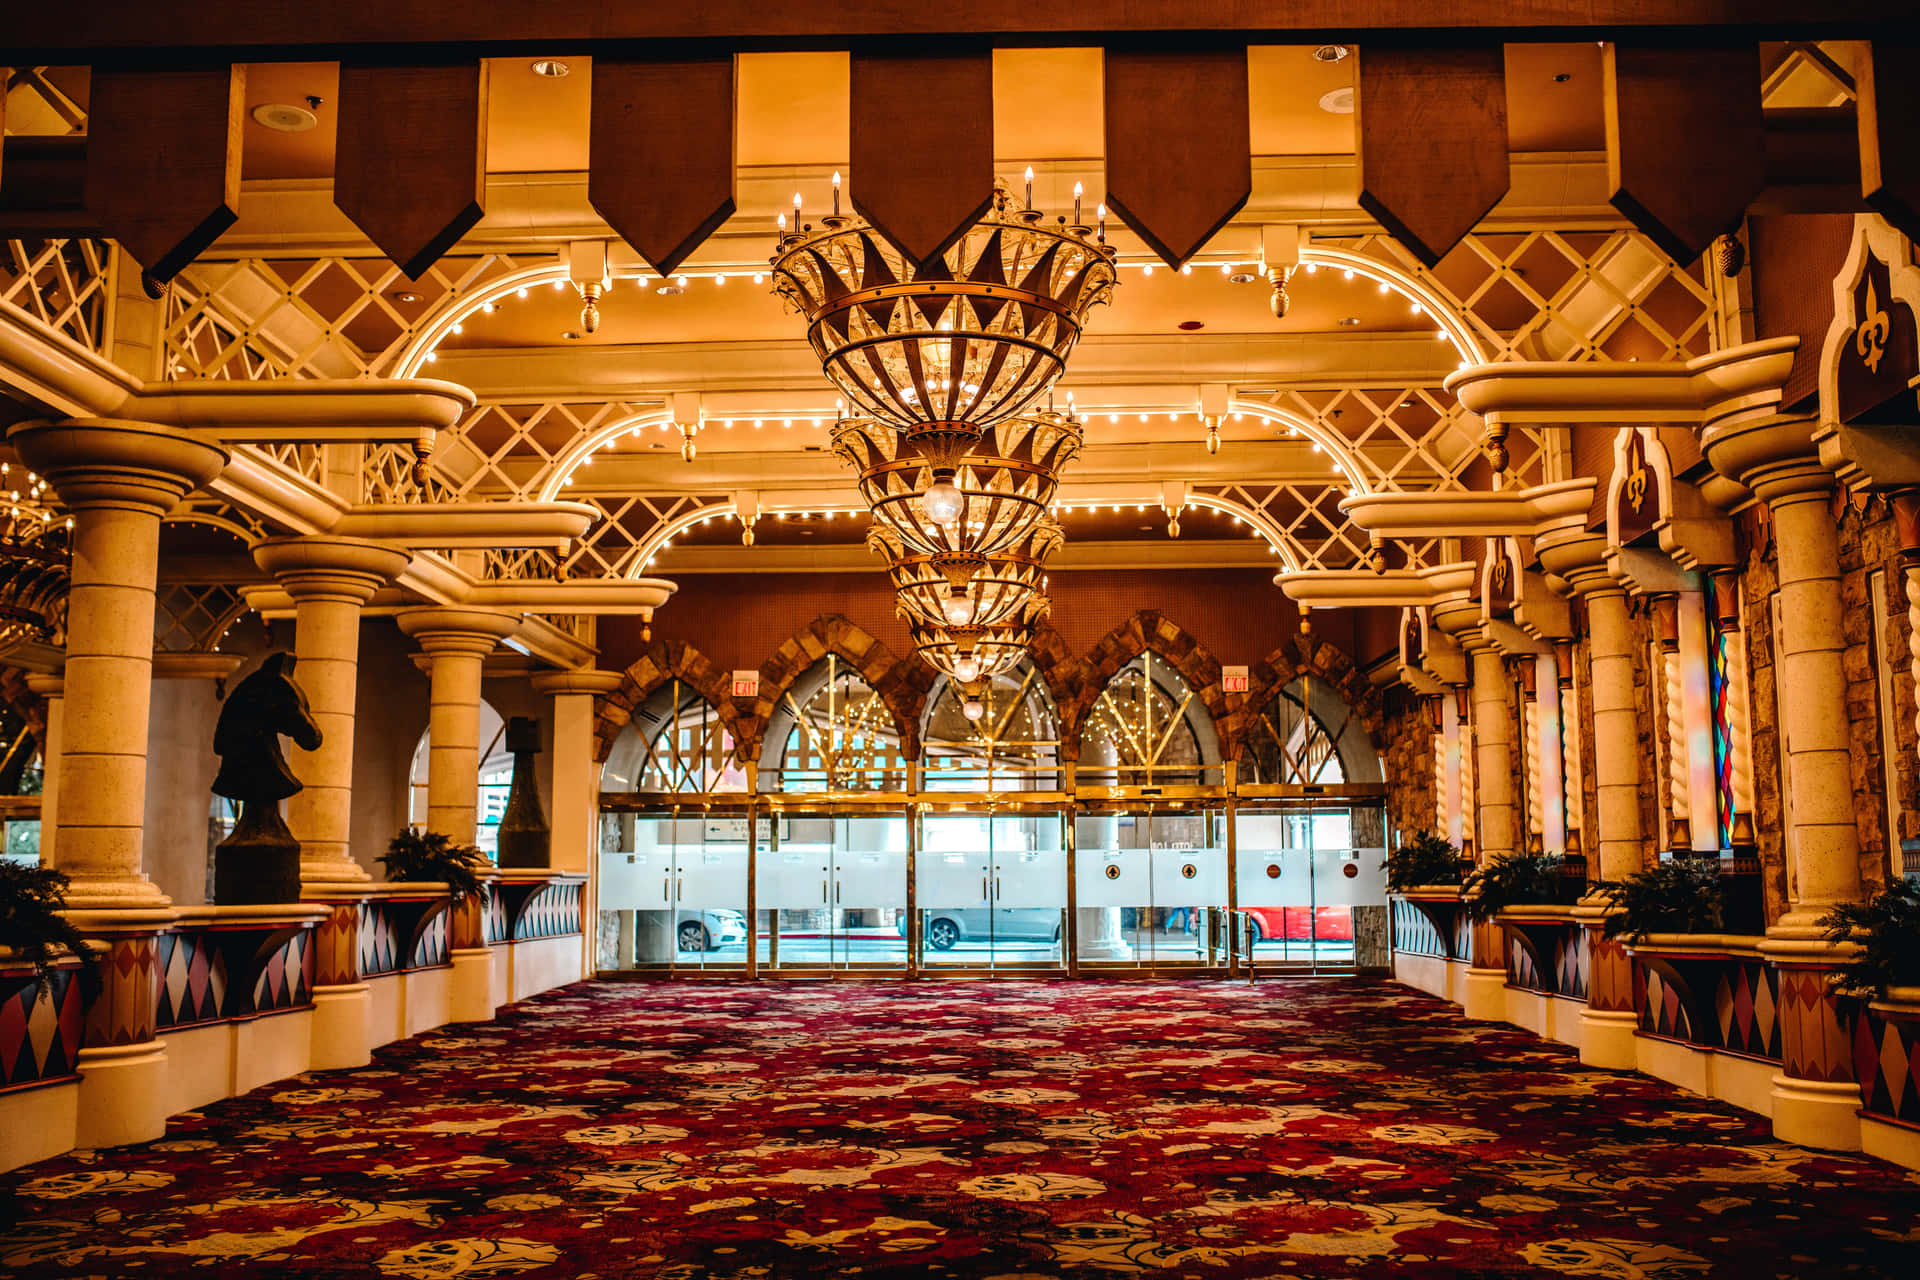 Enjoy a night of glamour, music, and dance in a grand Ballroom.